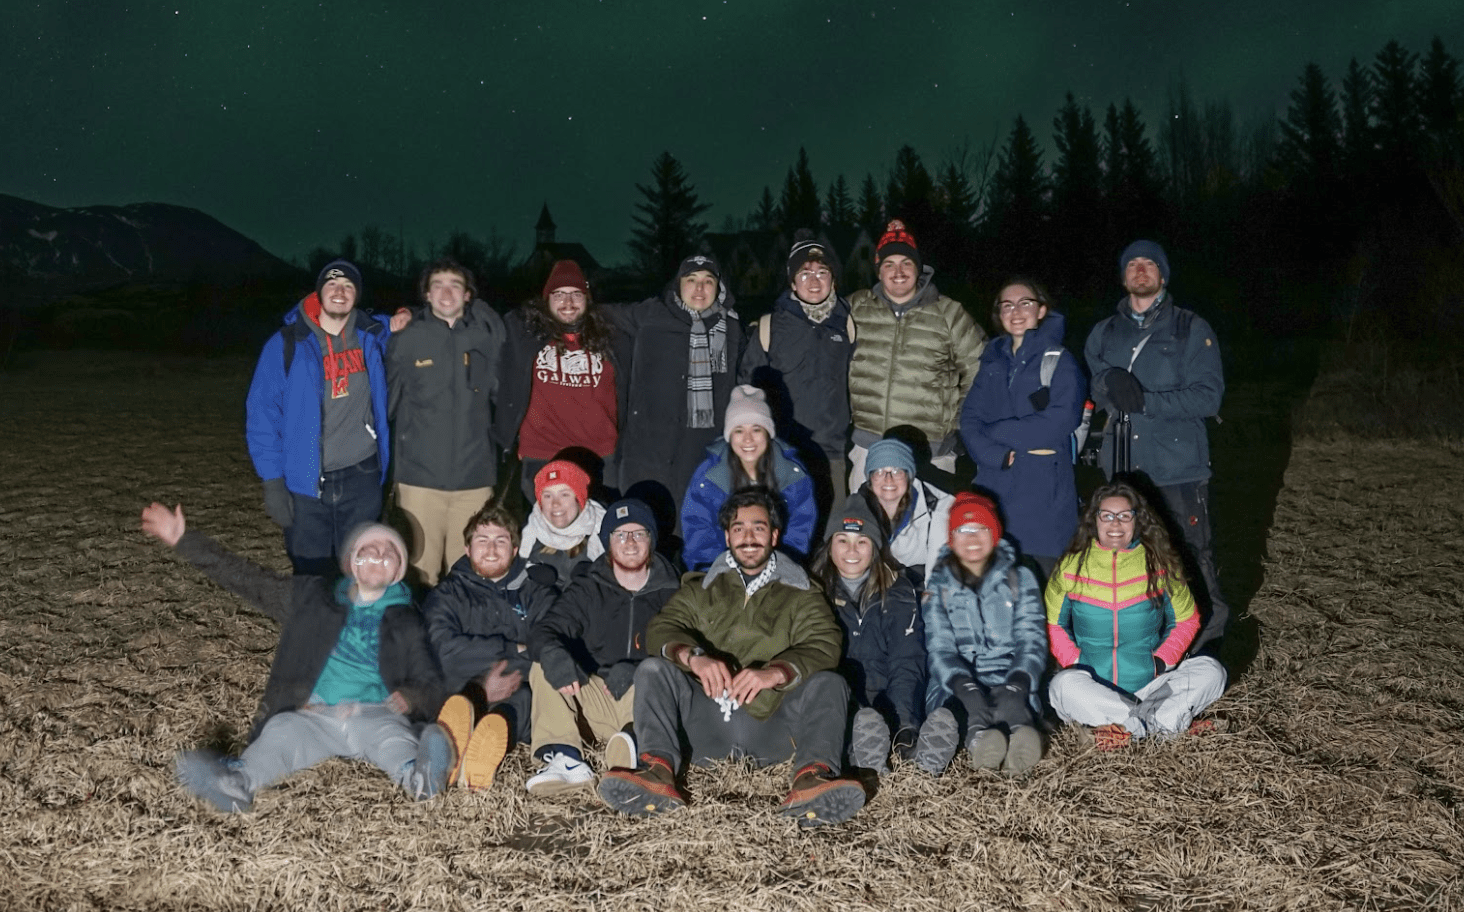 Yazan Hasan (pictured center, wearing green jacket) poses with his UMD-Winter: Iceland cohort. 